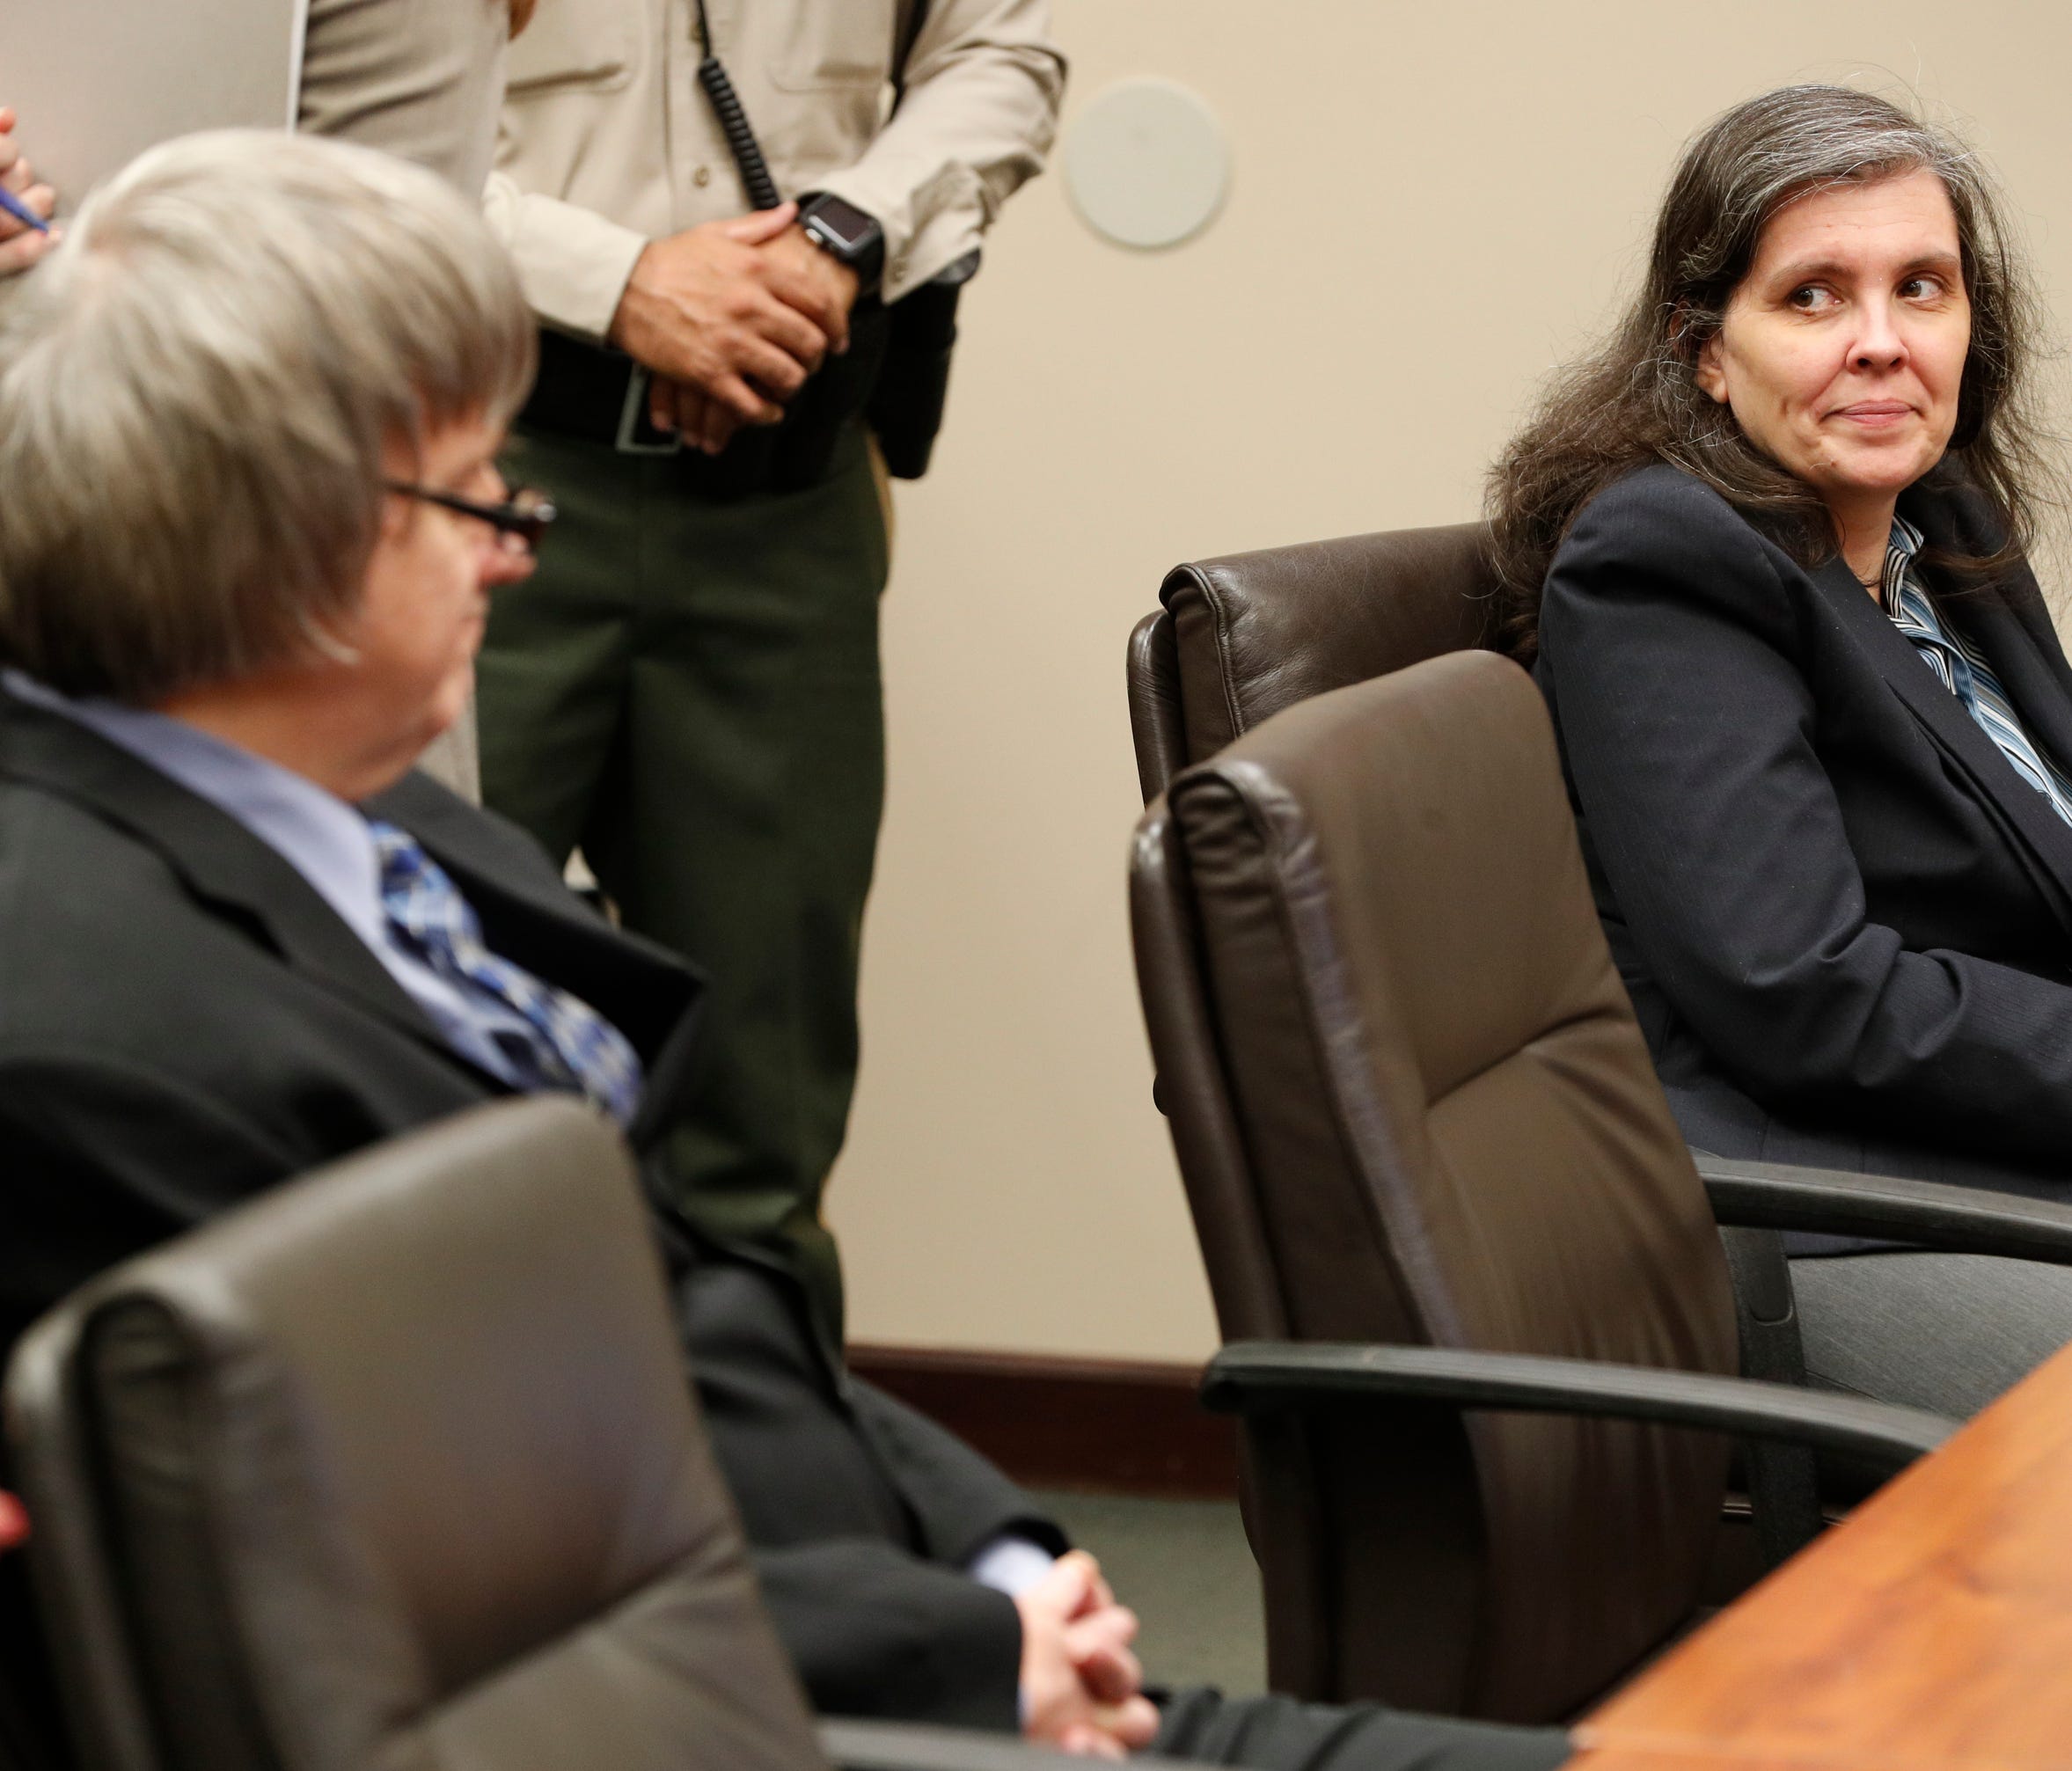 David and Louise Turpin appear in court for a conference about their case in Riverside, Calif., Friday, Feb. 23, 2018. They have pleaded not guilty to torture and other charges and each is held on $12 million bail. The couple was arrested last month 